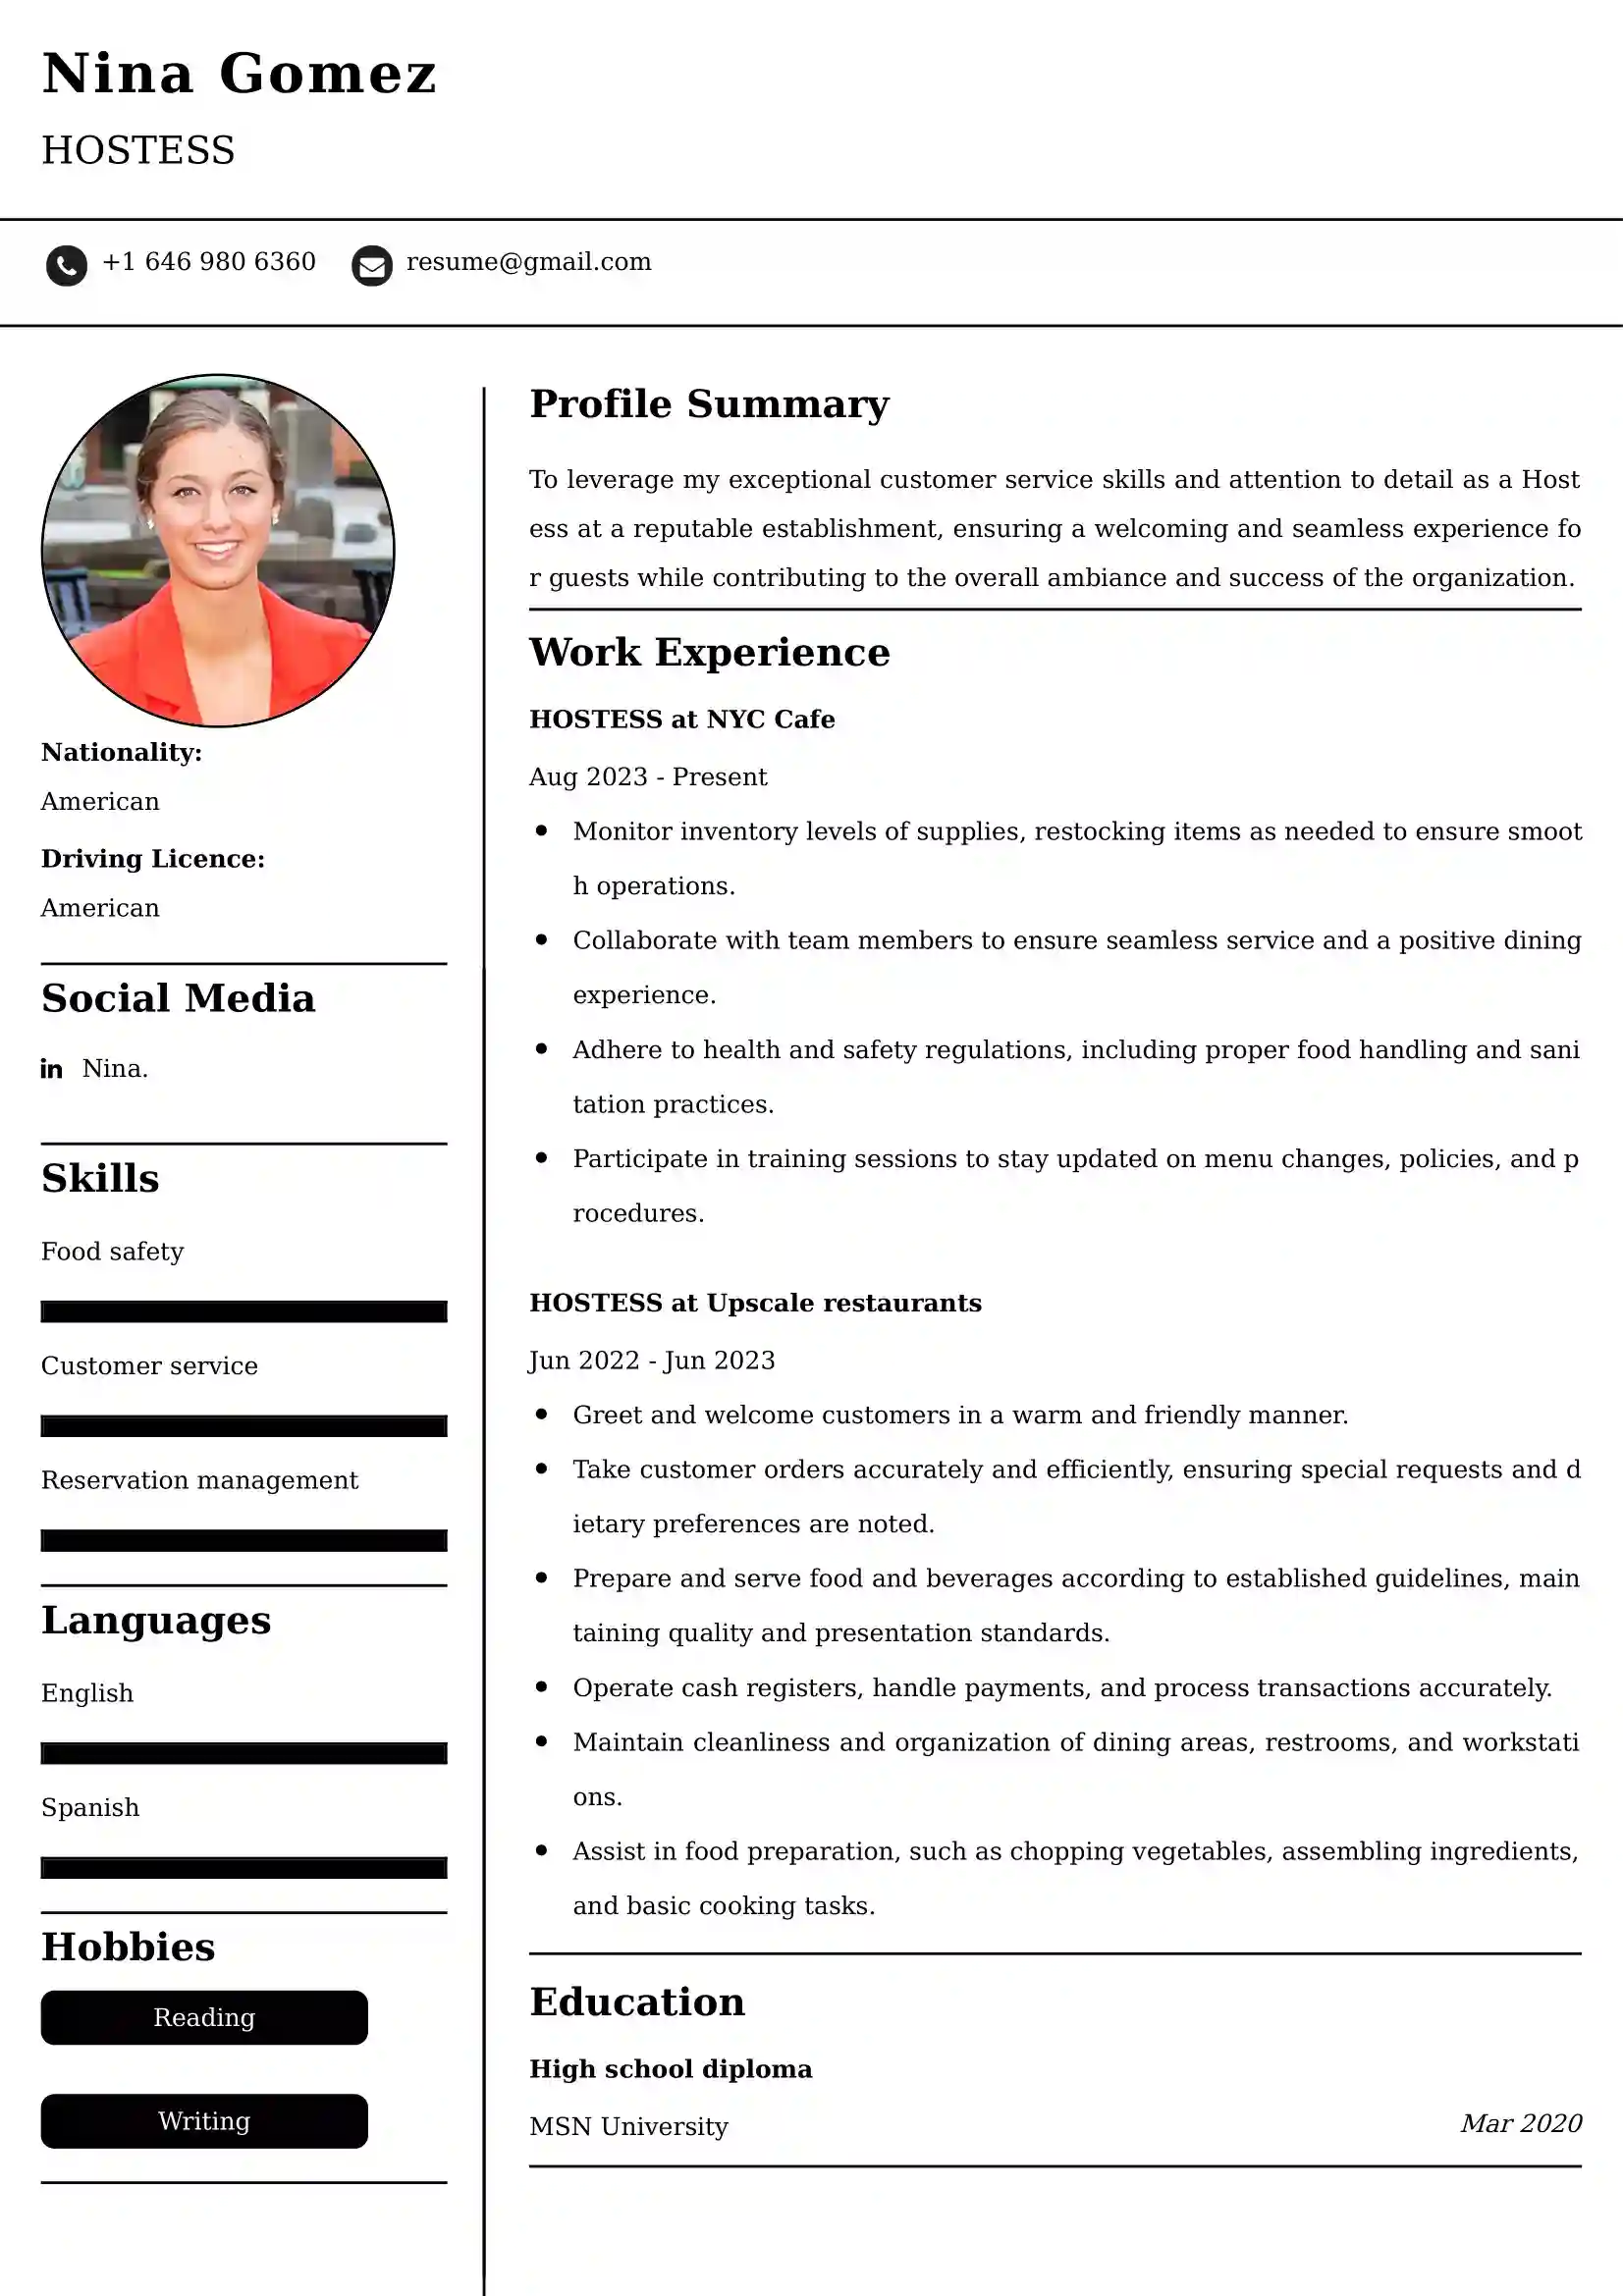 Hostess Resume Examples - UK Format, Latest Template.